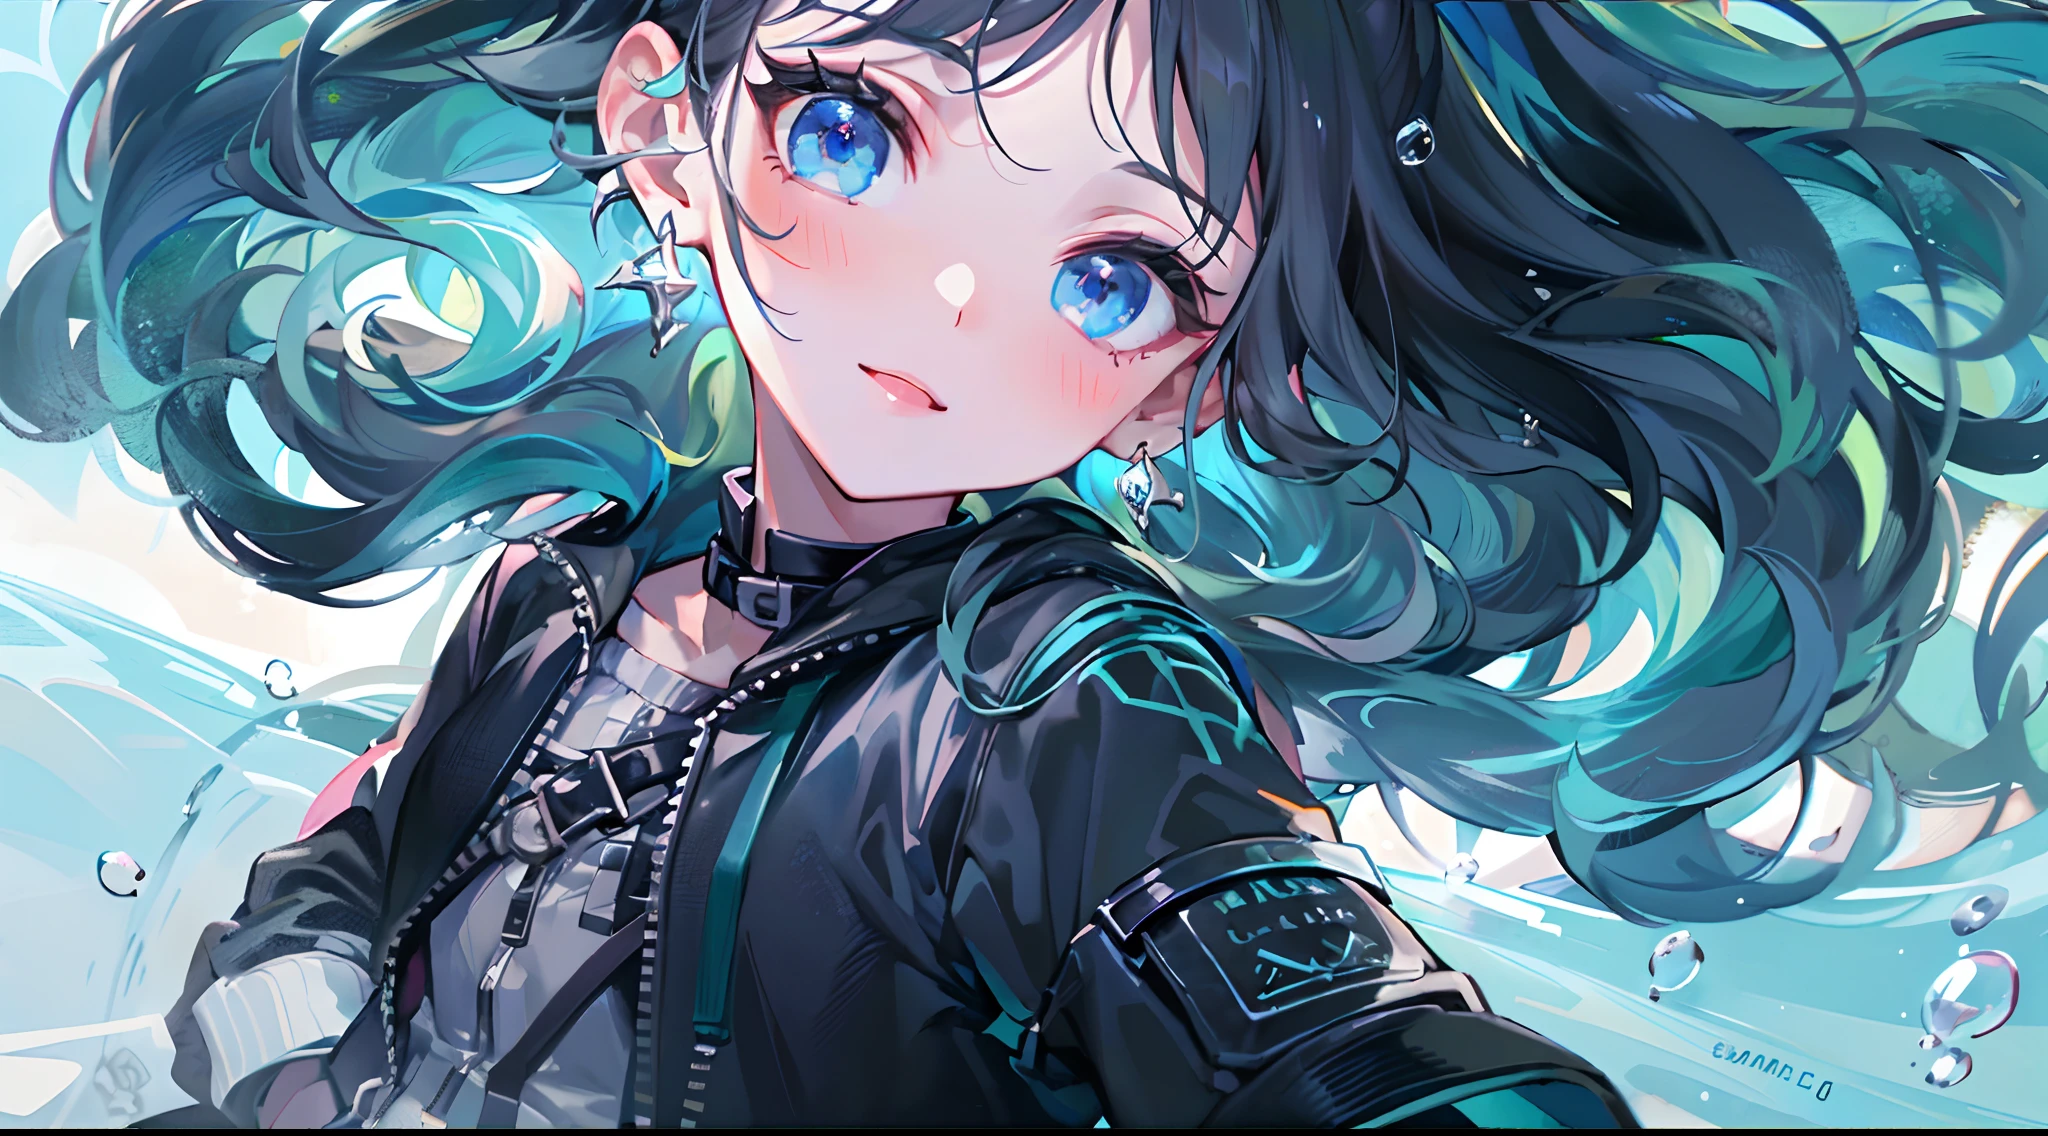 ((top-quality)), ((​masterpiece)), ((Ultra-detail)), (extremely delicate and beautiful), girl with, solo, cold attitude,((Black jacket)),She is very(relax)with  the(Settled down)Looks,A darK-haired, depth of fields,evil smile,Bubble, under the water, Air bubble,bright light blue eyes,Inner color with black hair and light blue tips,Cold background,Bob Hair - Linear Art, shortpants、knee high socks、Camisole inner shirt、Hands in pockets